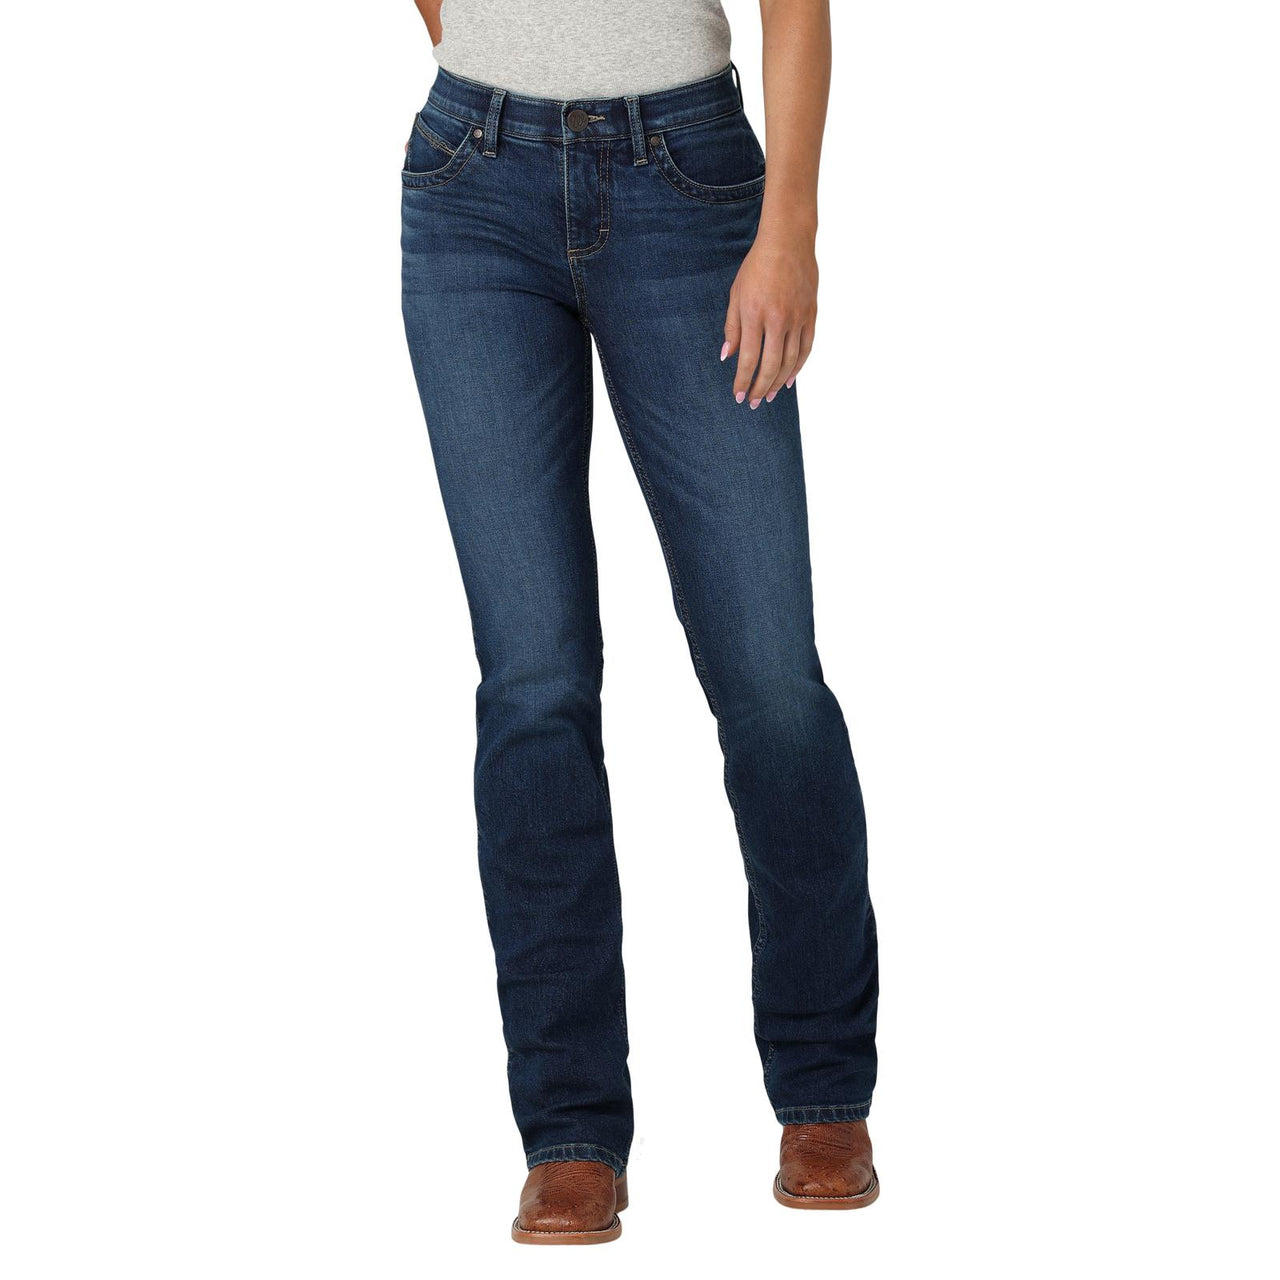 Wrangler Women's Ultimate Riding Q-Baby Bootcut Jeans - Shirley